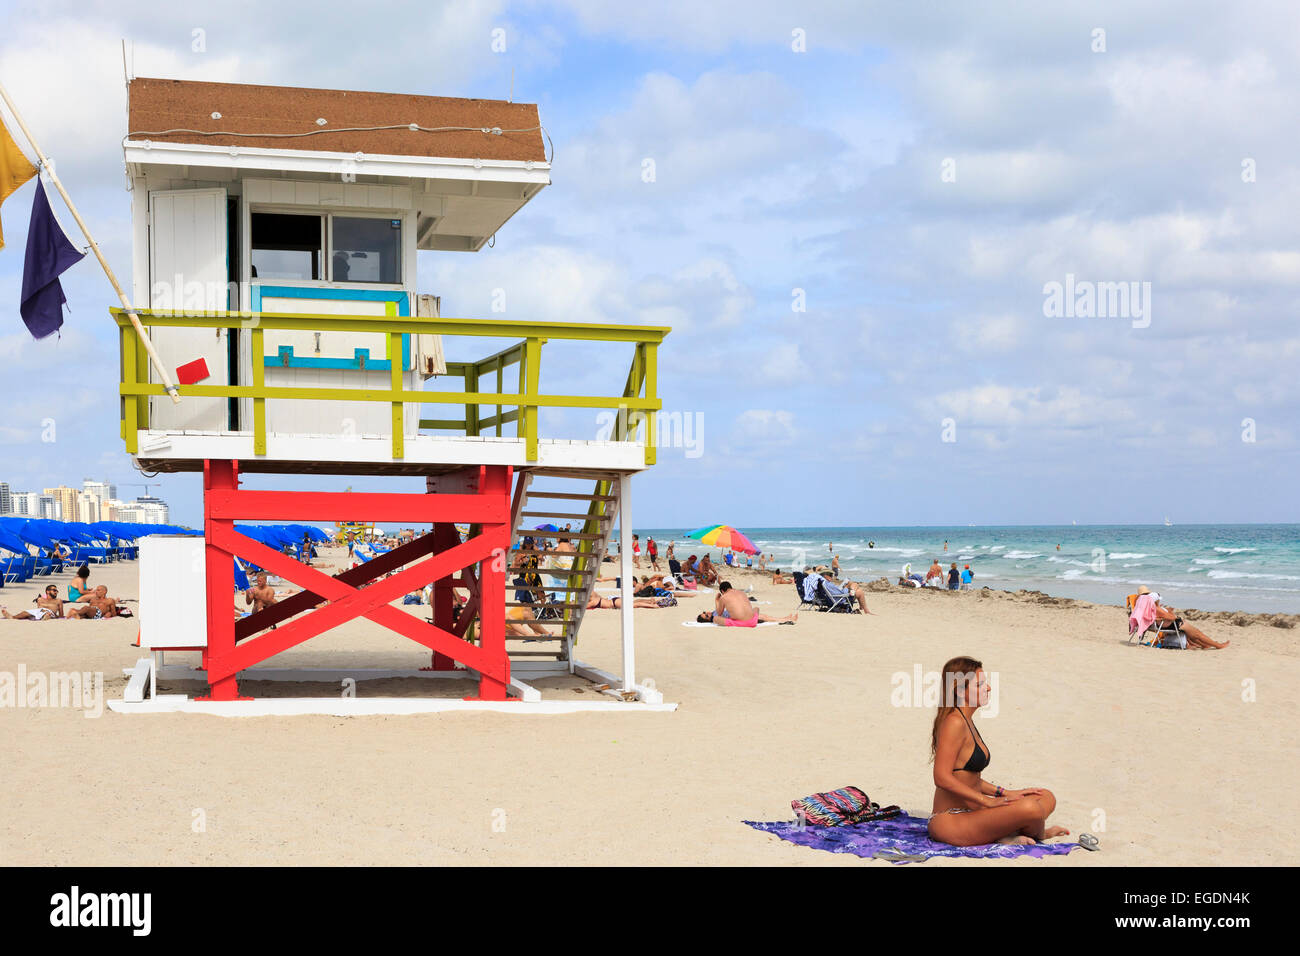 South Beach, Ocean View, Miami with the pacific Ocean and wooden lifeguard shelter, Miami, Florida, USA Stock Photo